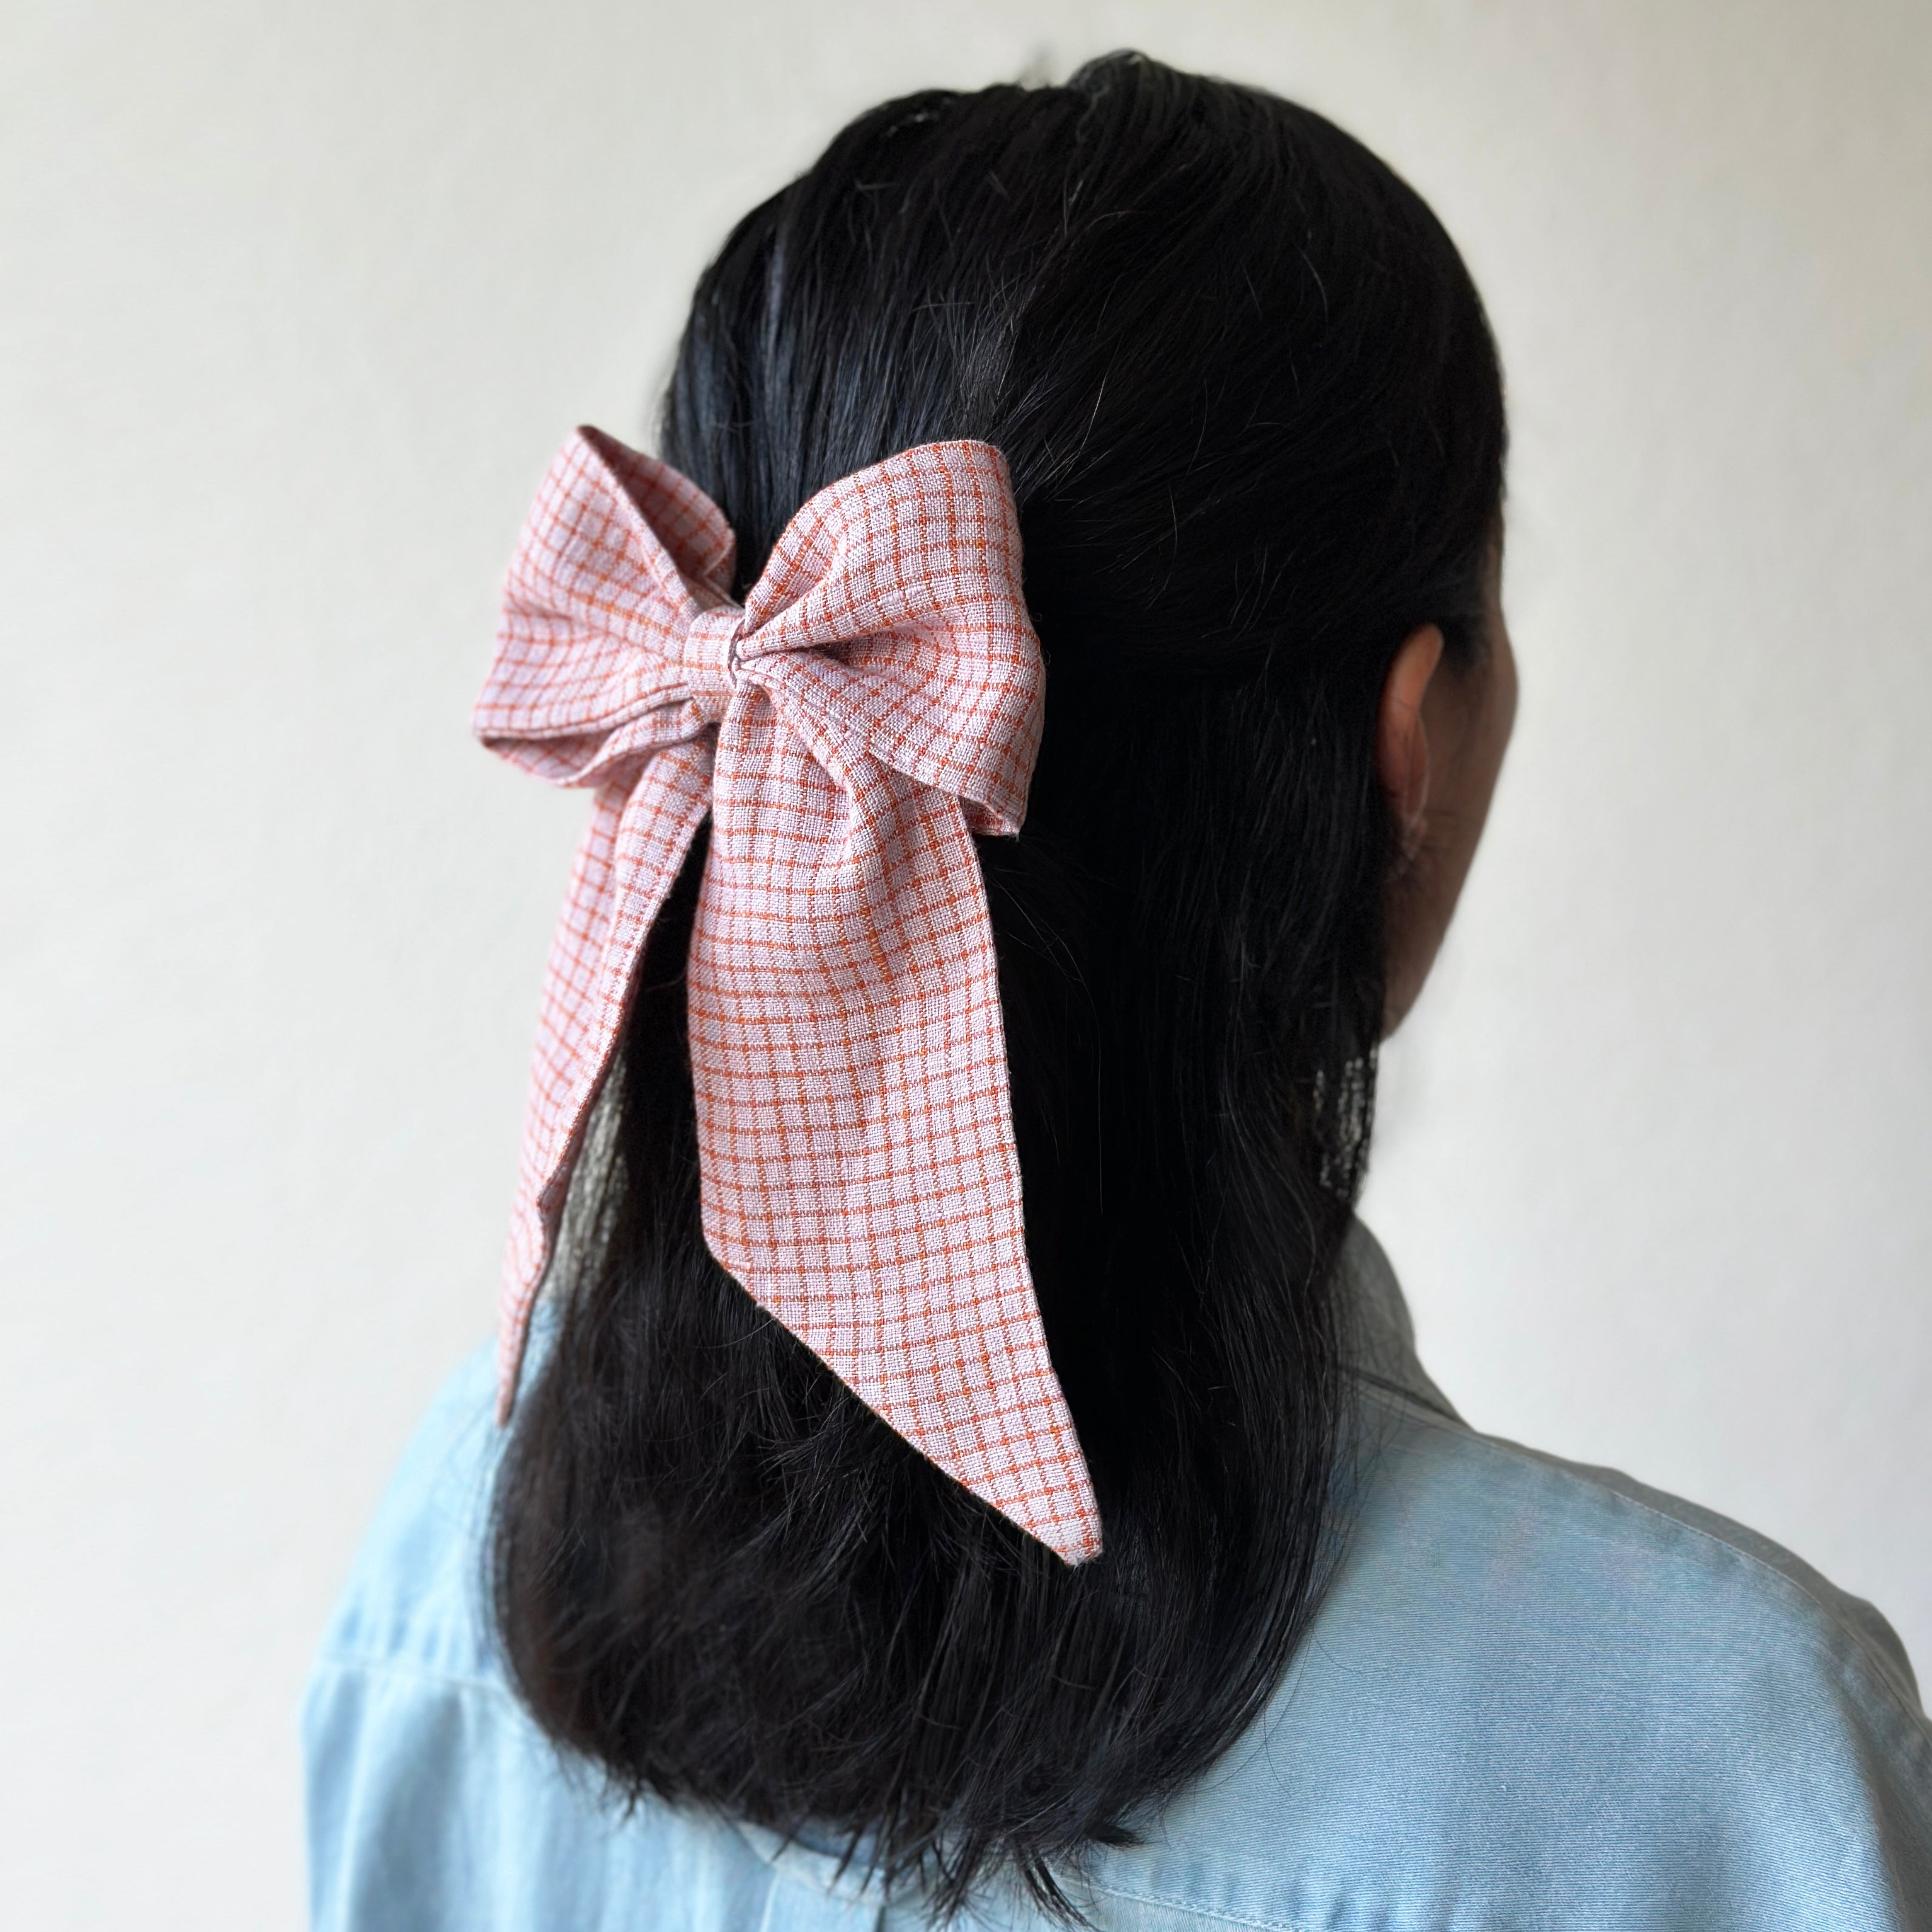 Oversized Hair Bow - Pale Pink Orange Check